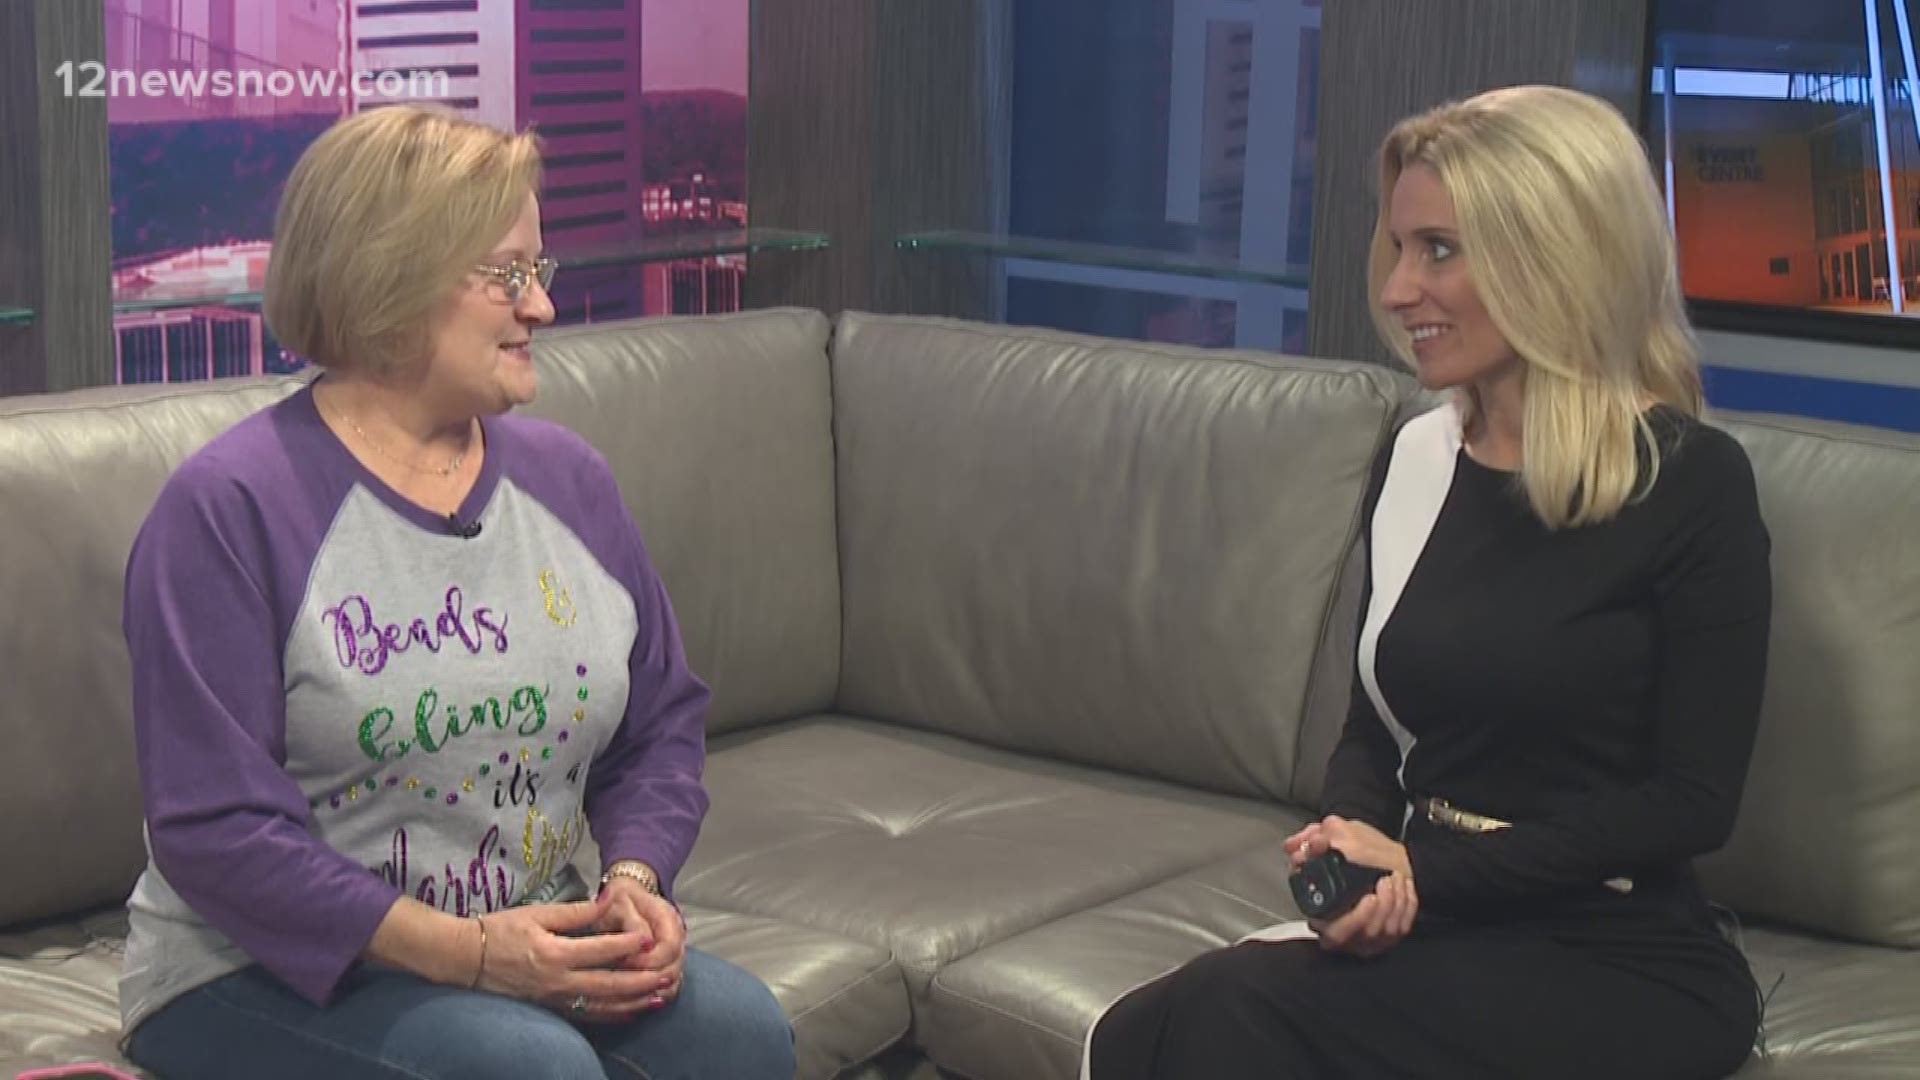 Mardi Gras is quickly approaching! Cynthia Hinds from the Krewe of Aurora tells us how she's preparing.